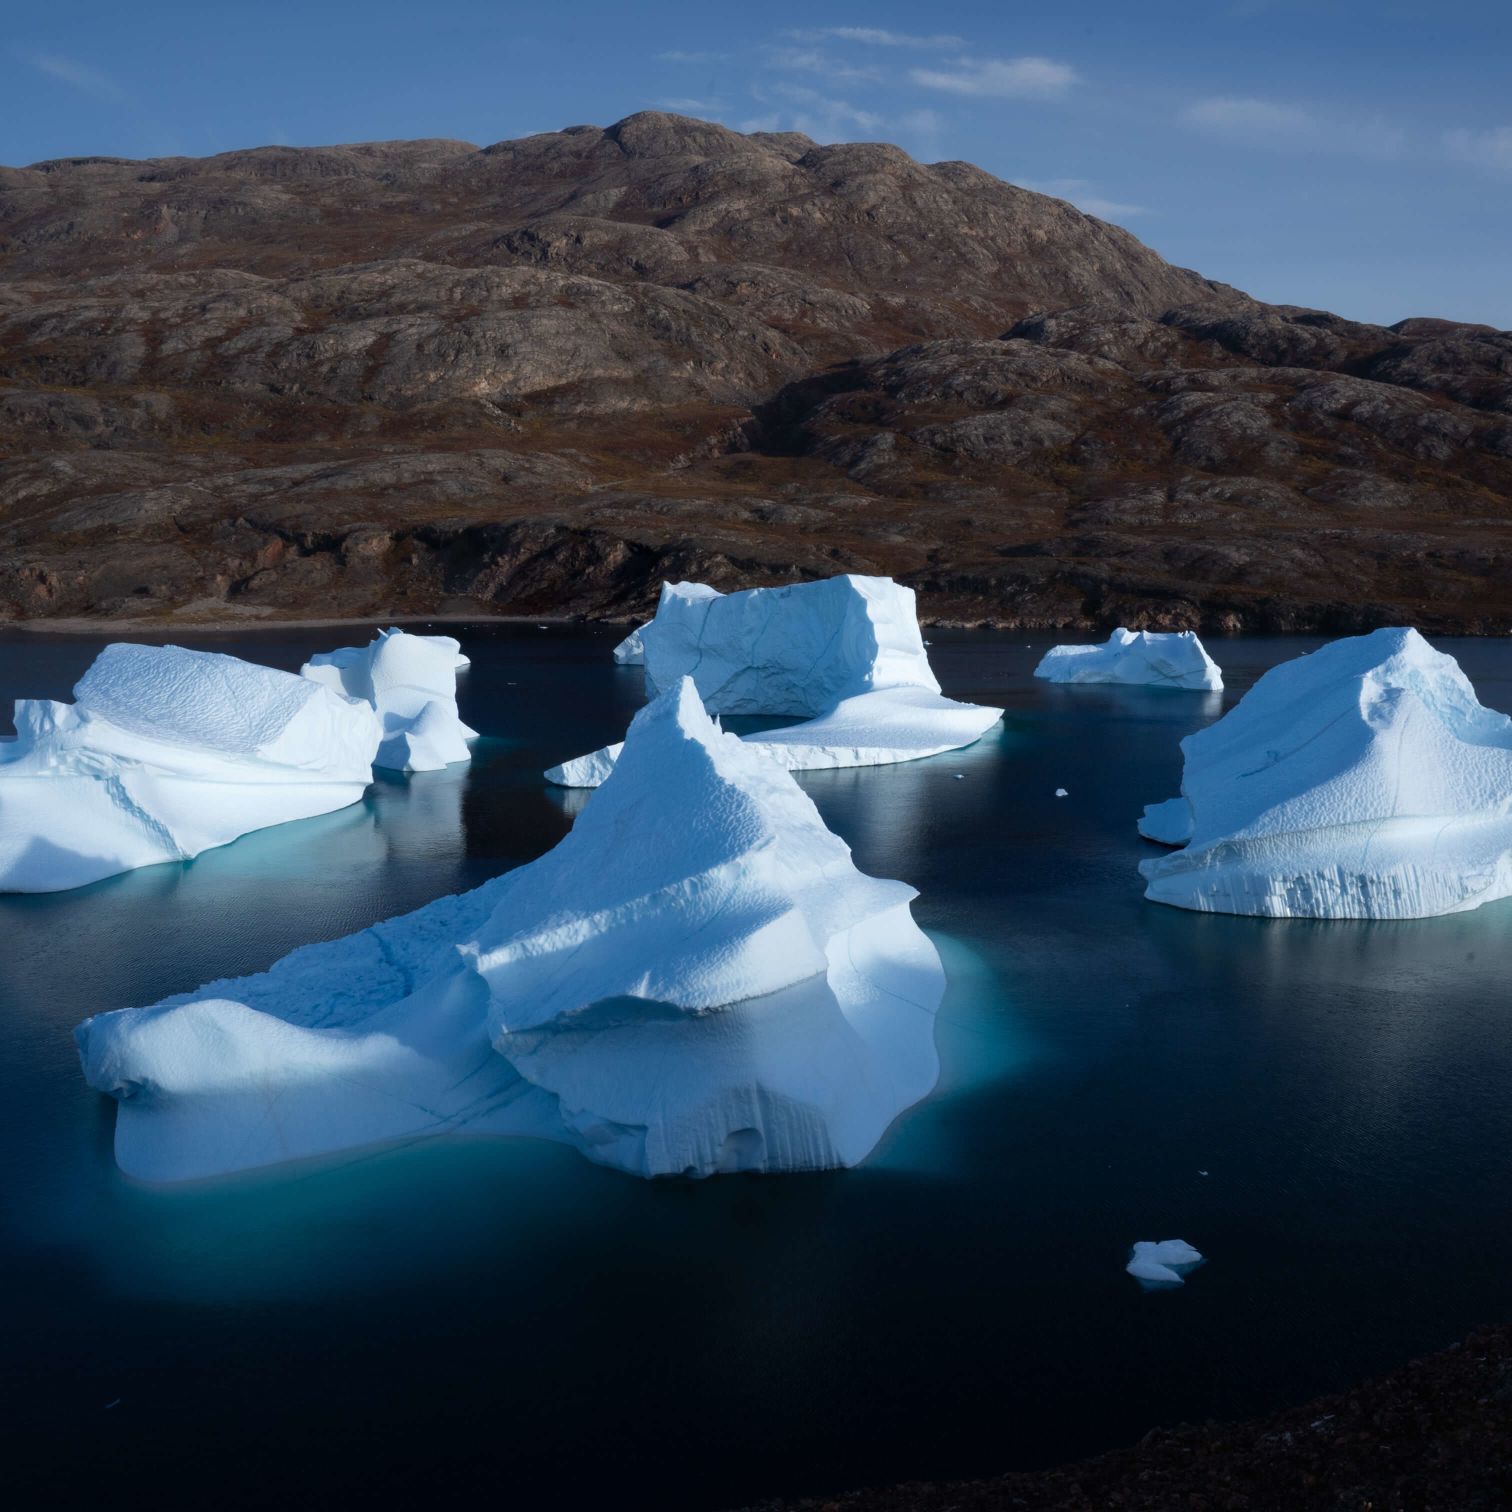 A Group Of Icebergs In A Body Of Water